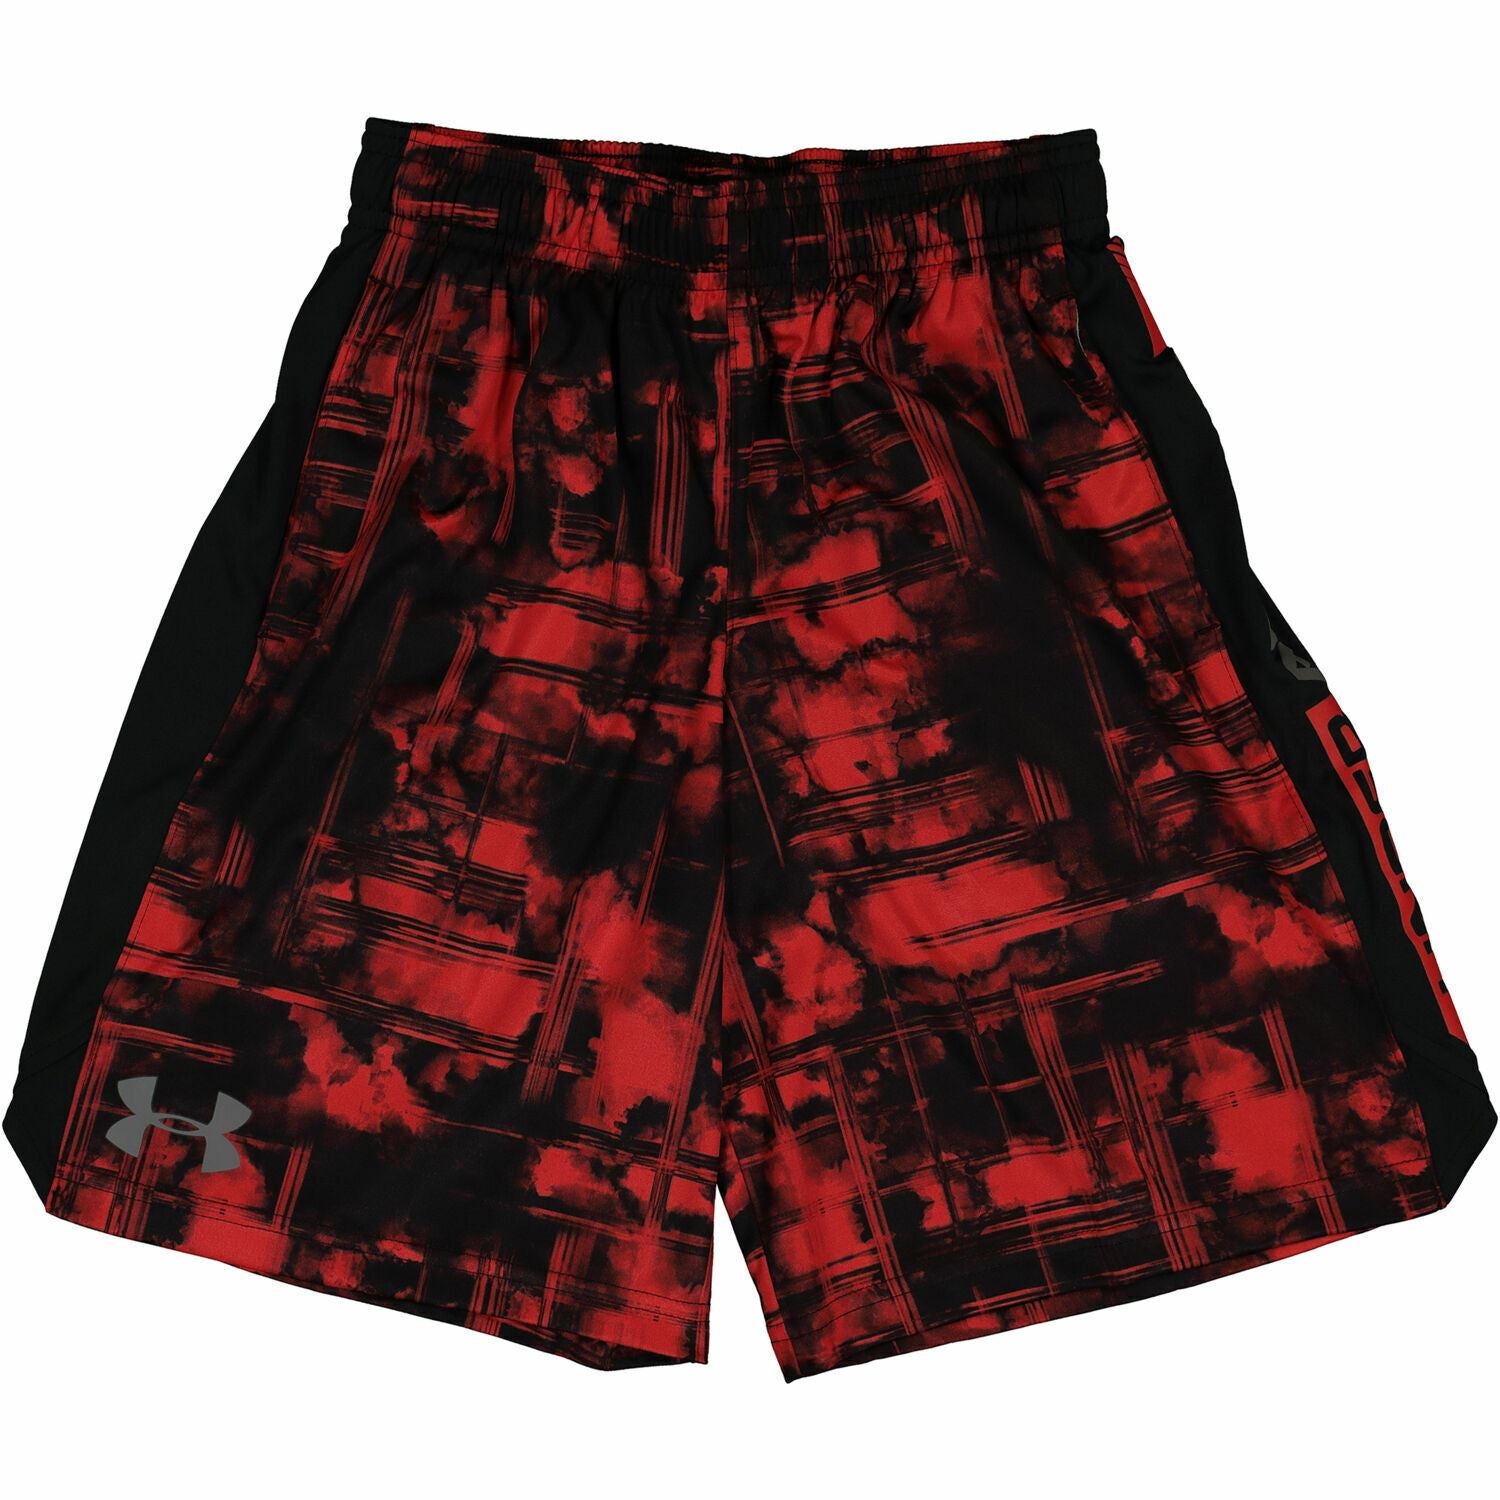 UNDER ARMOUR Boys' Lightweight Red/Black Pattern Shorts, 8 y to 9 years